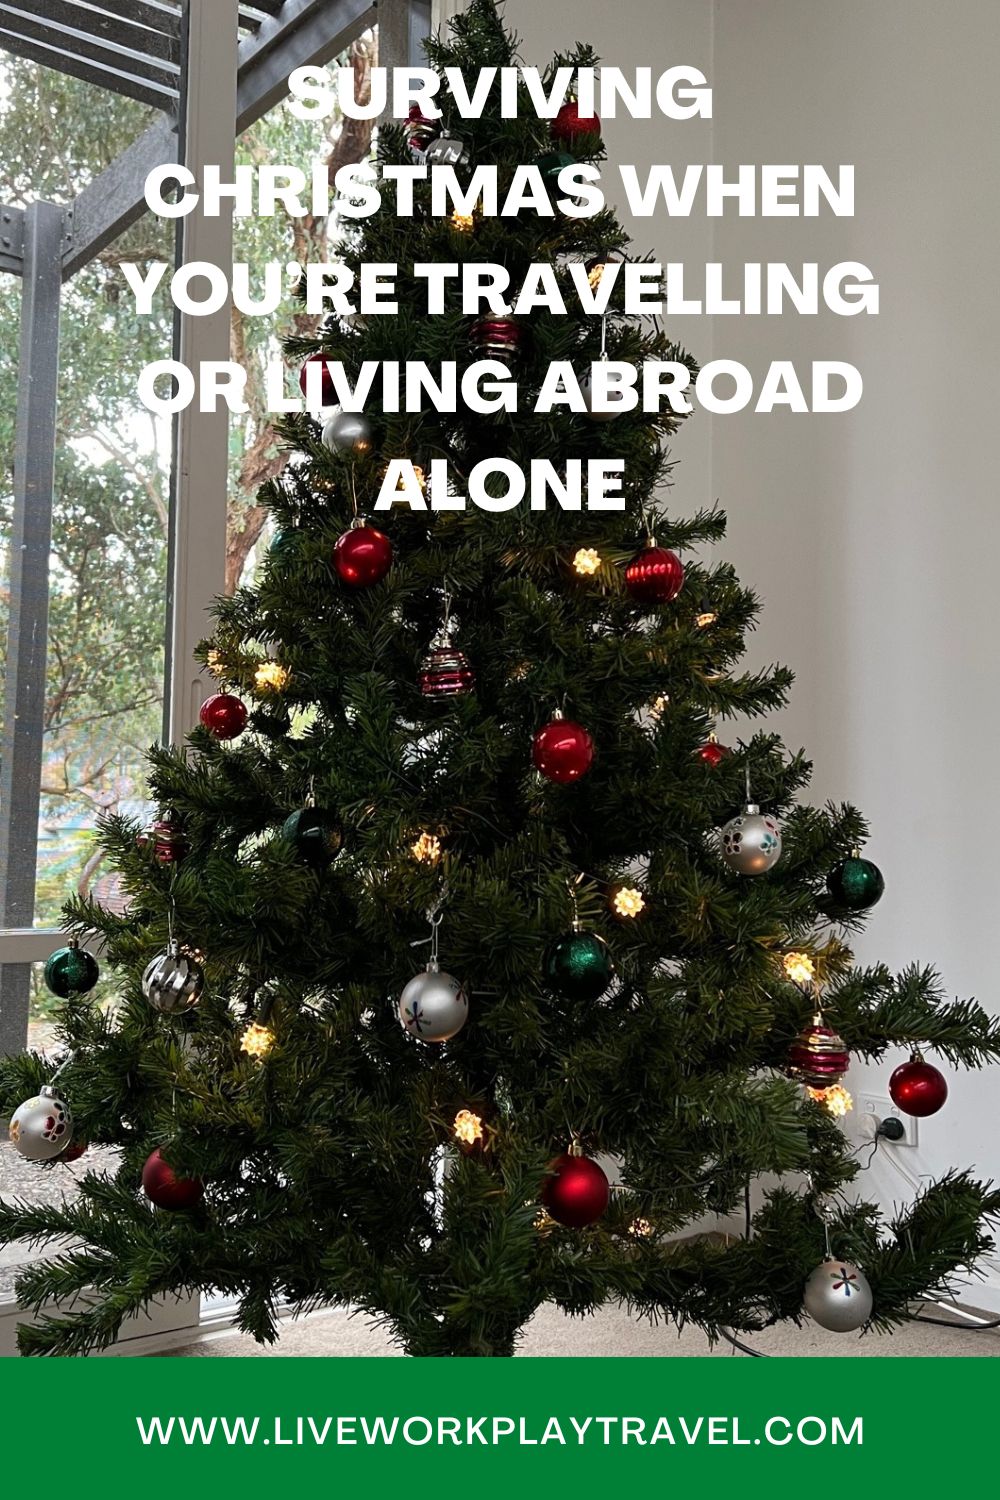 Christmas Tree with baubles to helps surviving Christmas when you're travelling or living abroad alone.